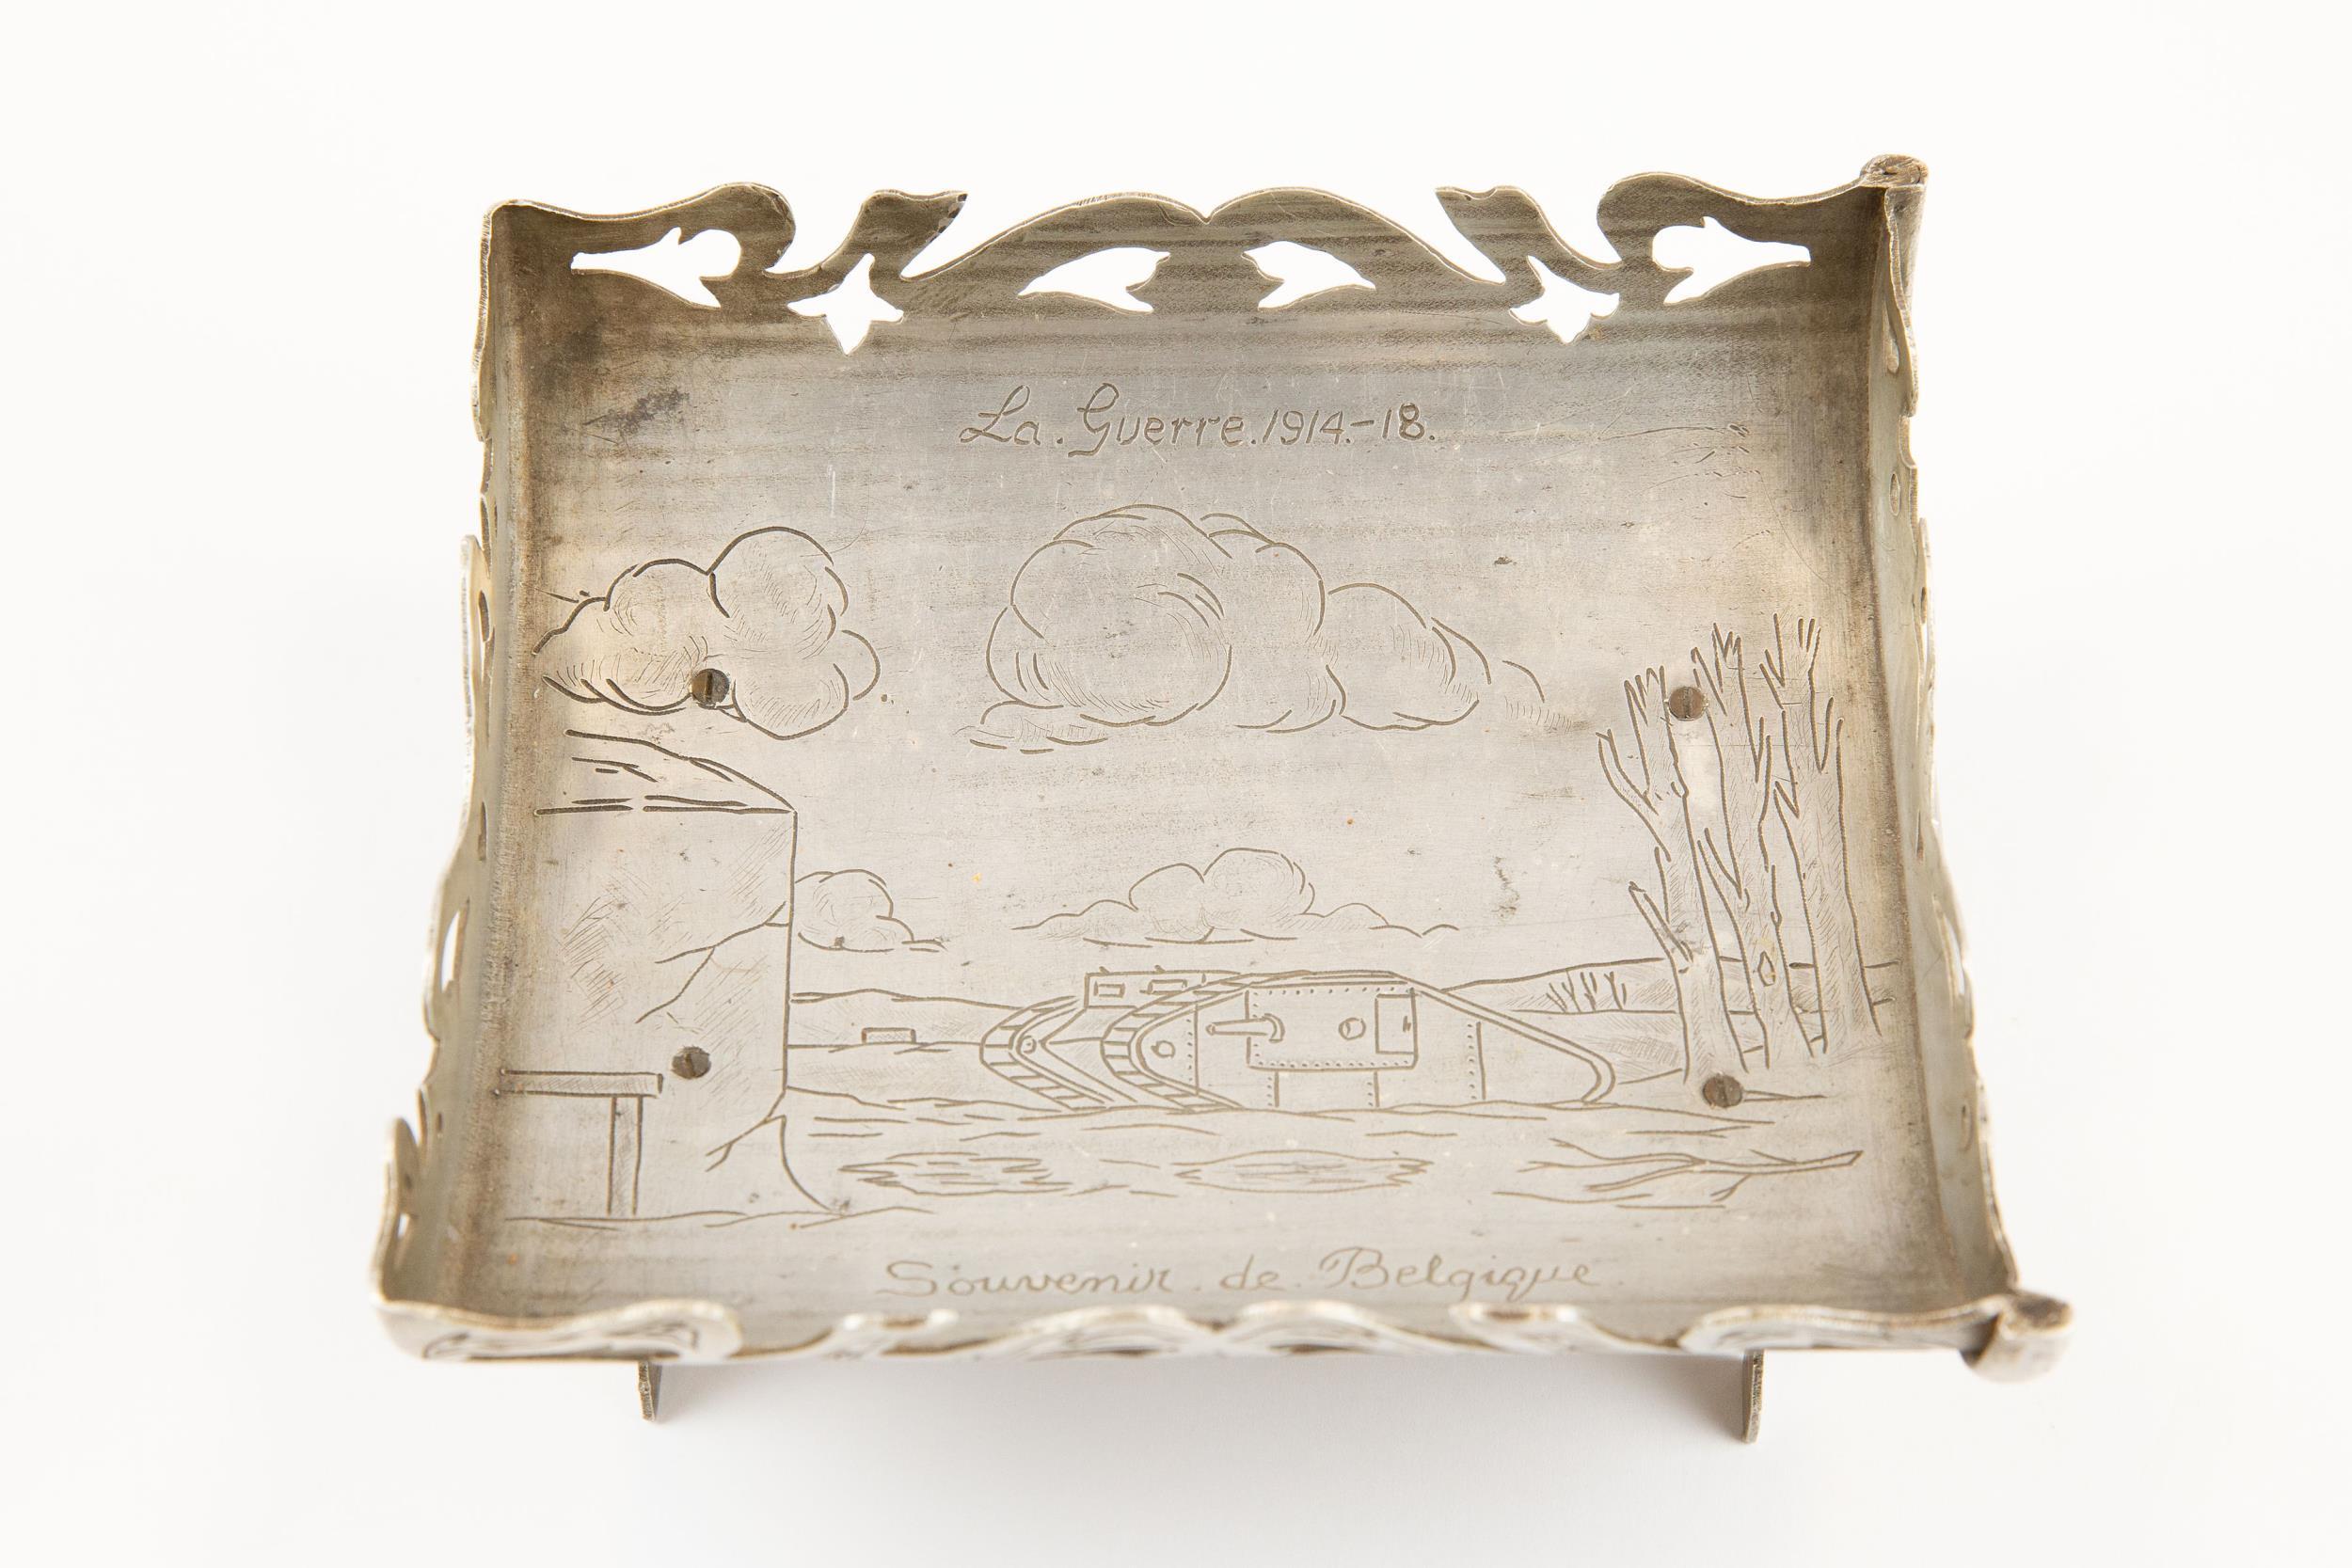 A WWI "Trench Art" souvenir basket or tray, made from a section of an aluminium water bottle,